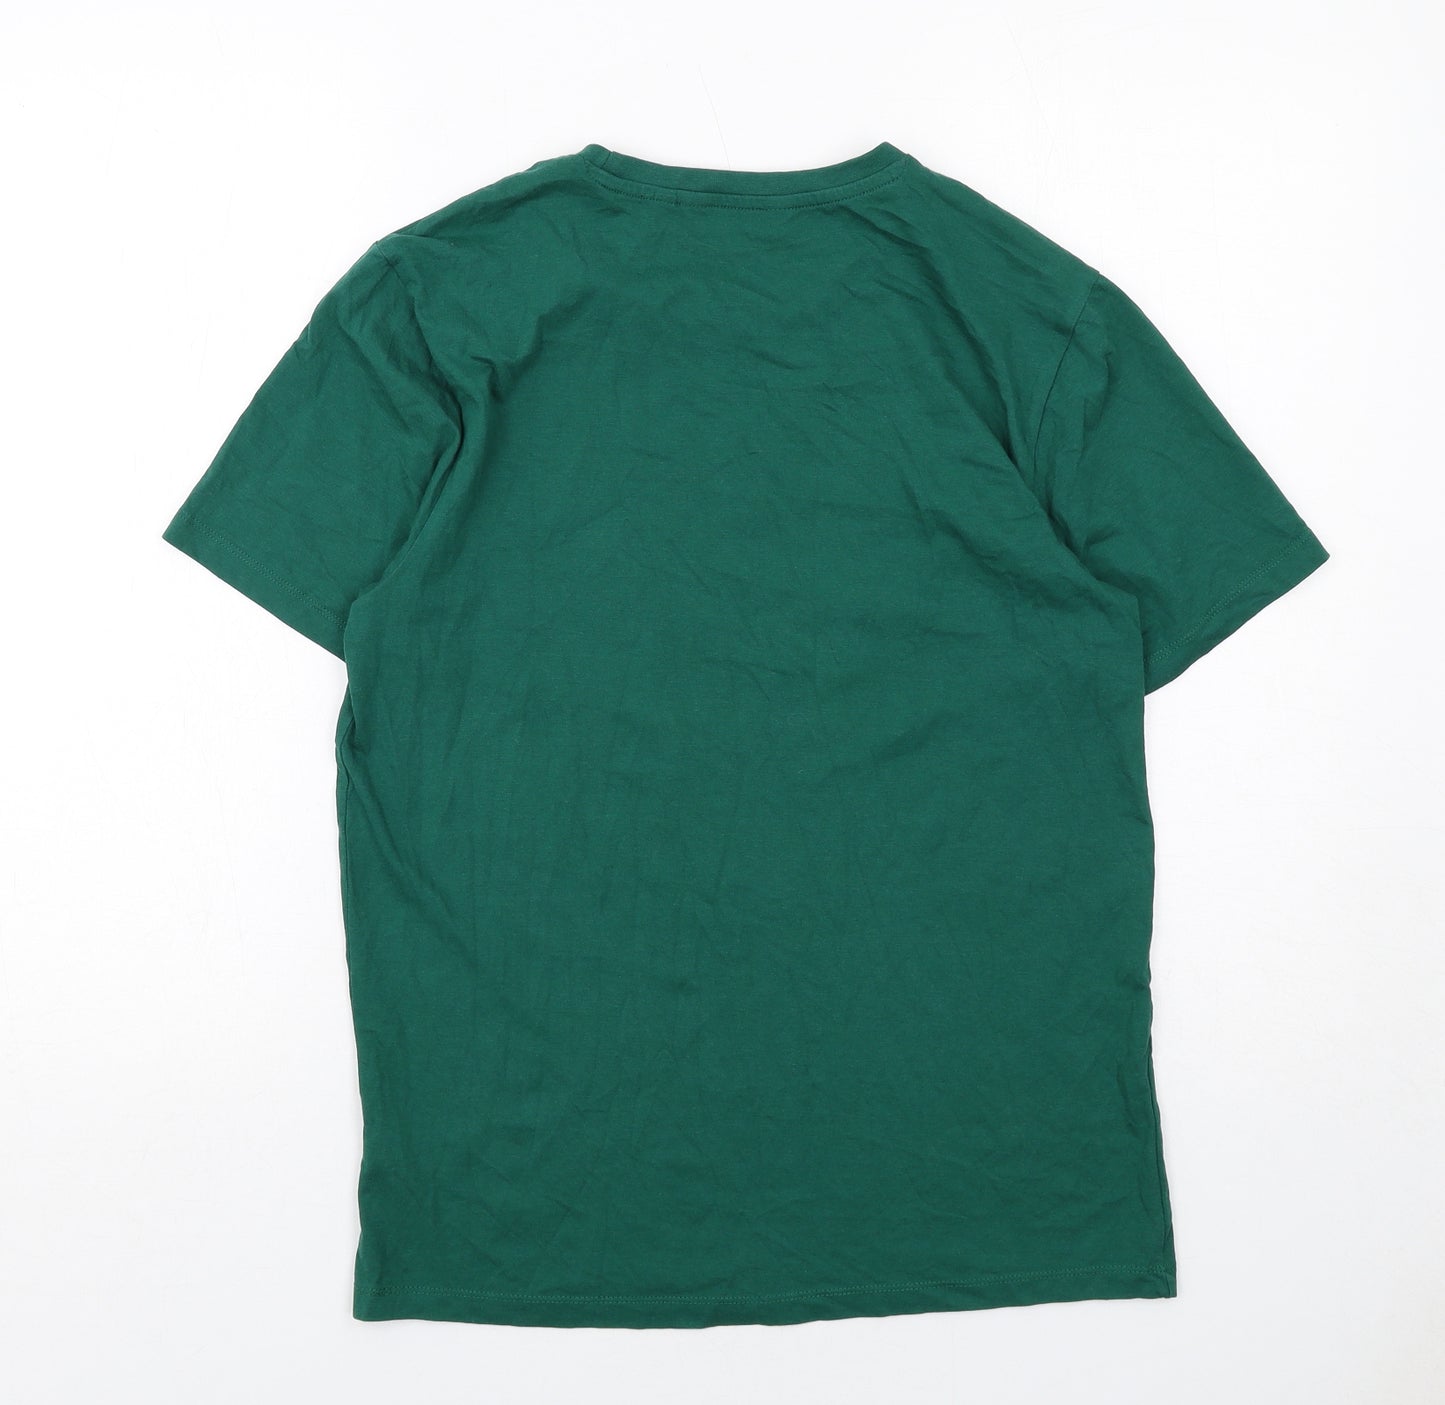 NEXT Mens Green Cotton T-Shirt Size S Round Neck - Christmas Reinbeer